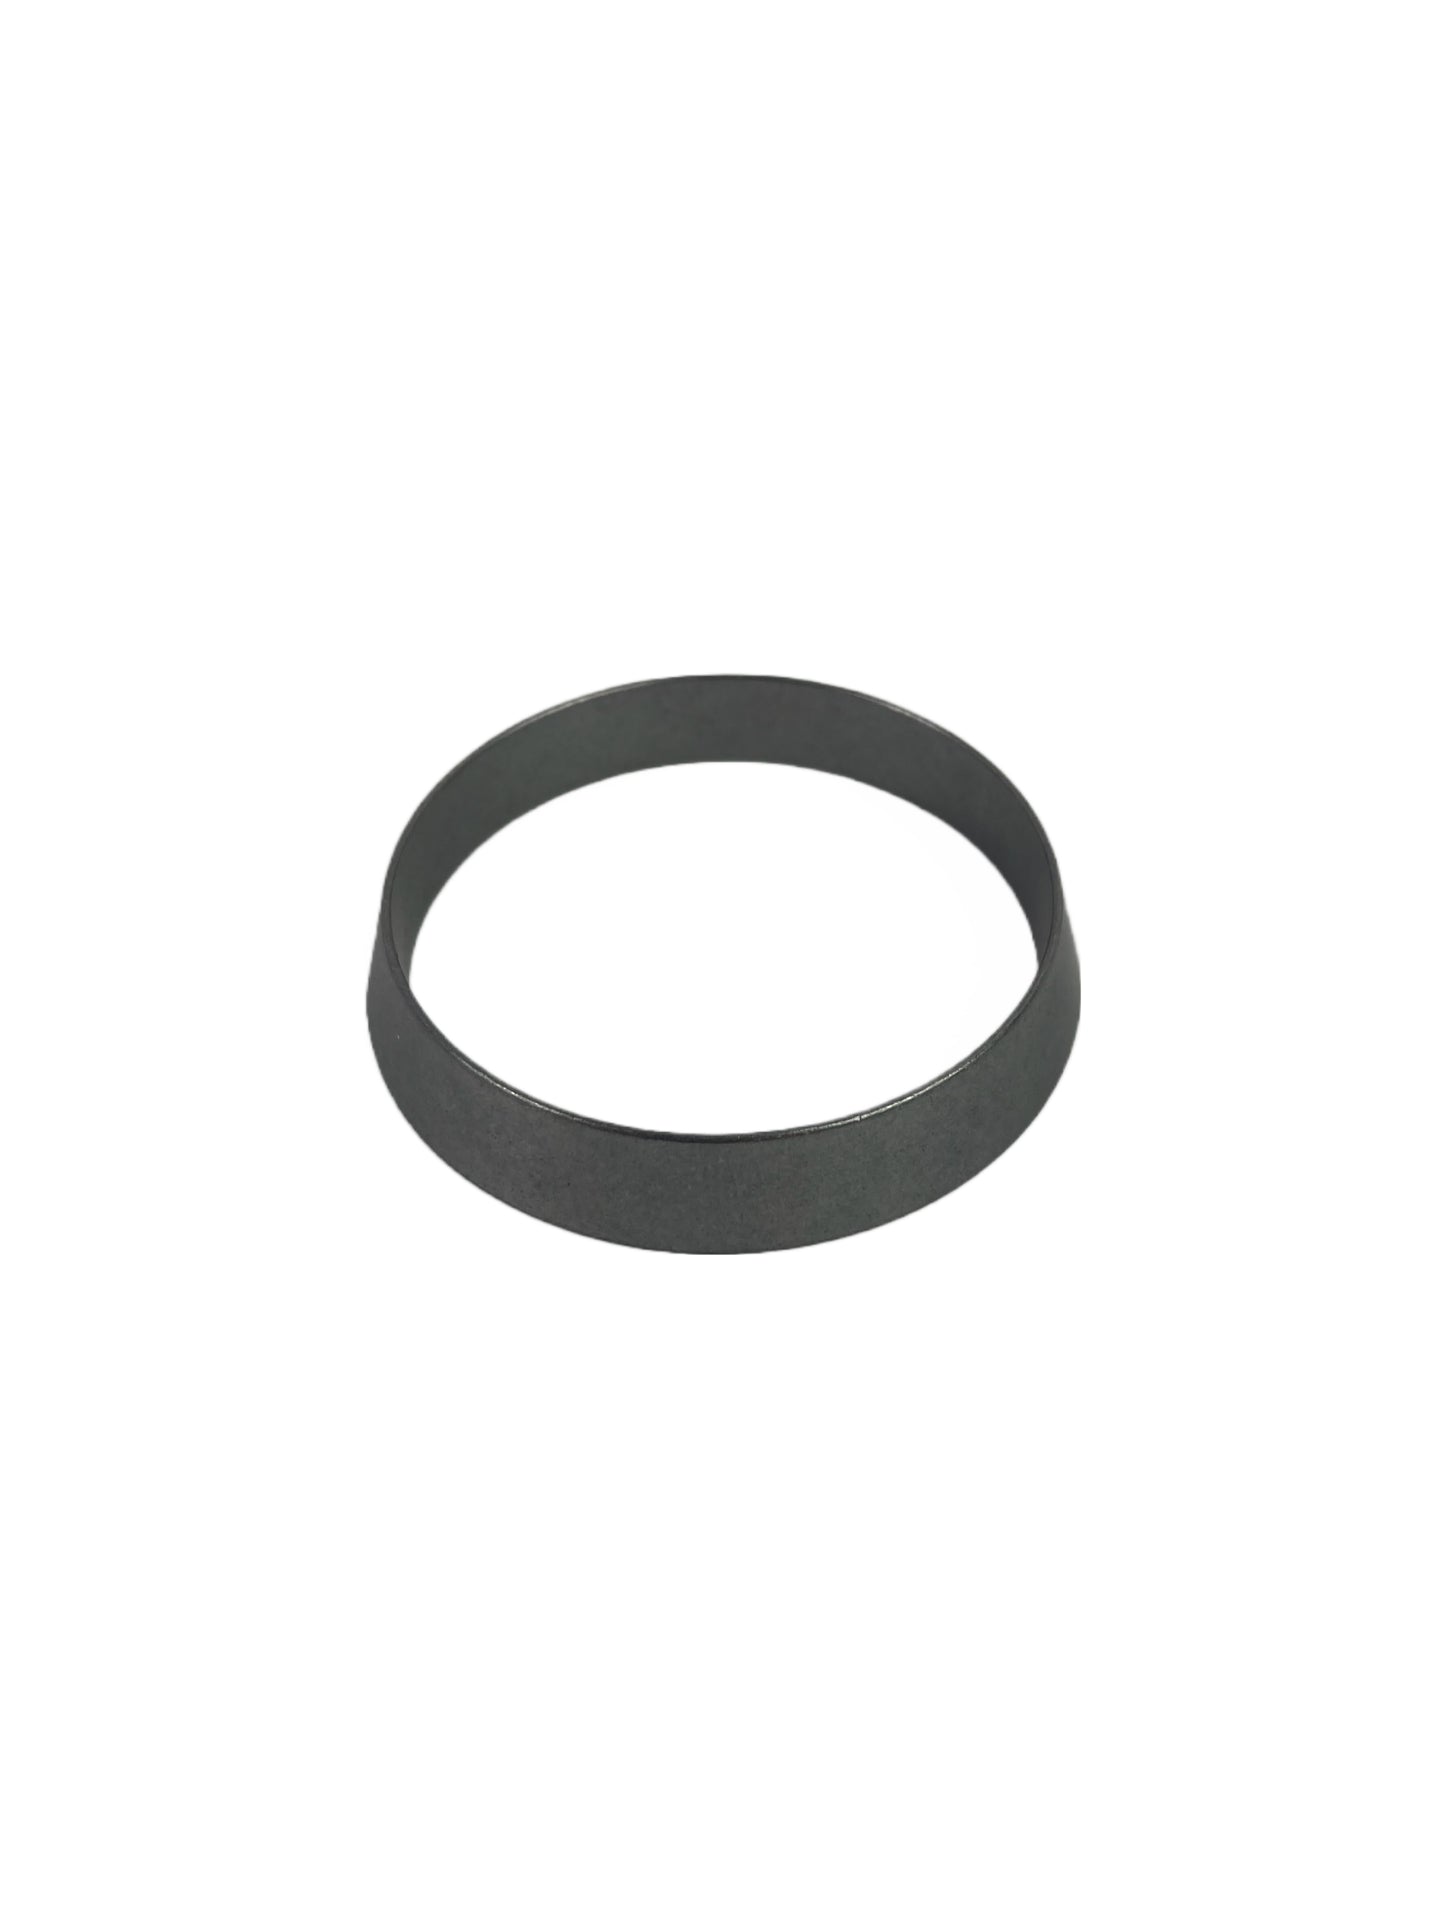 Pair of friction ring